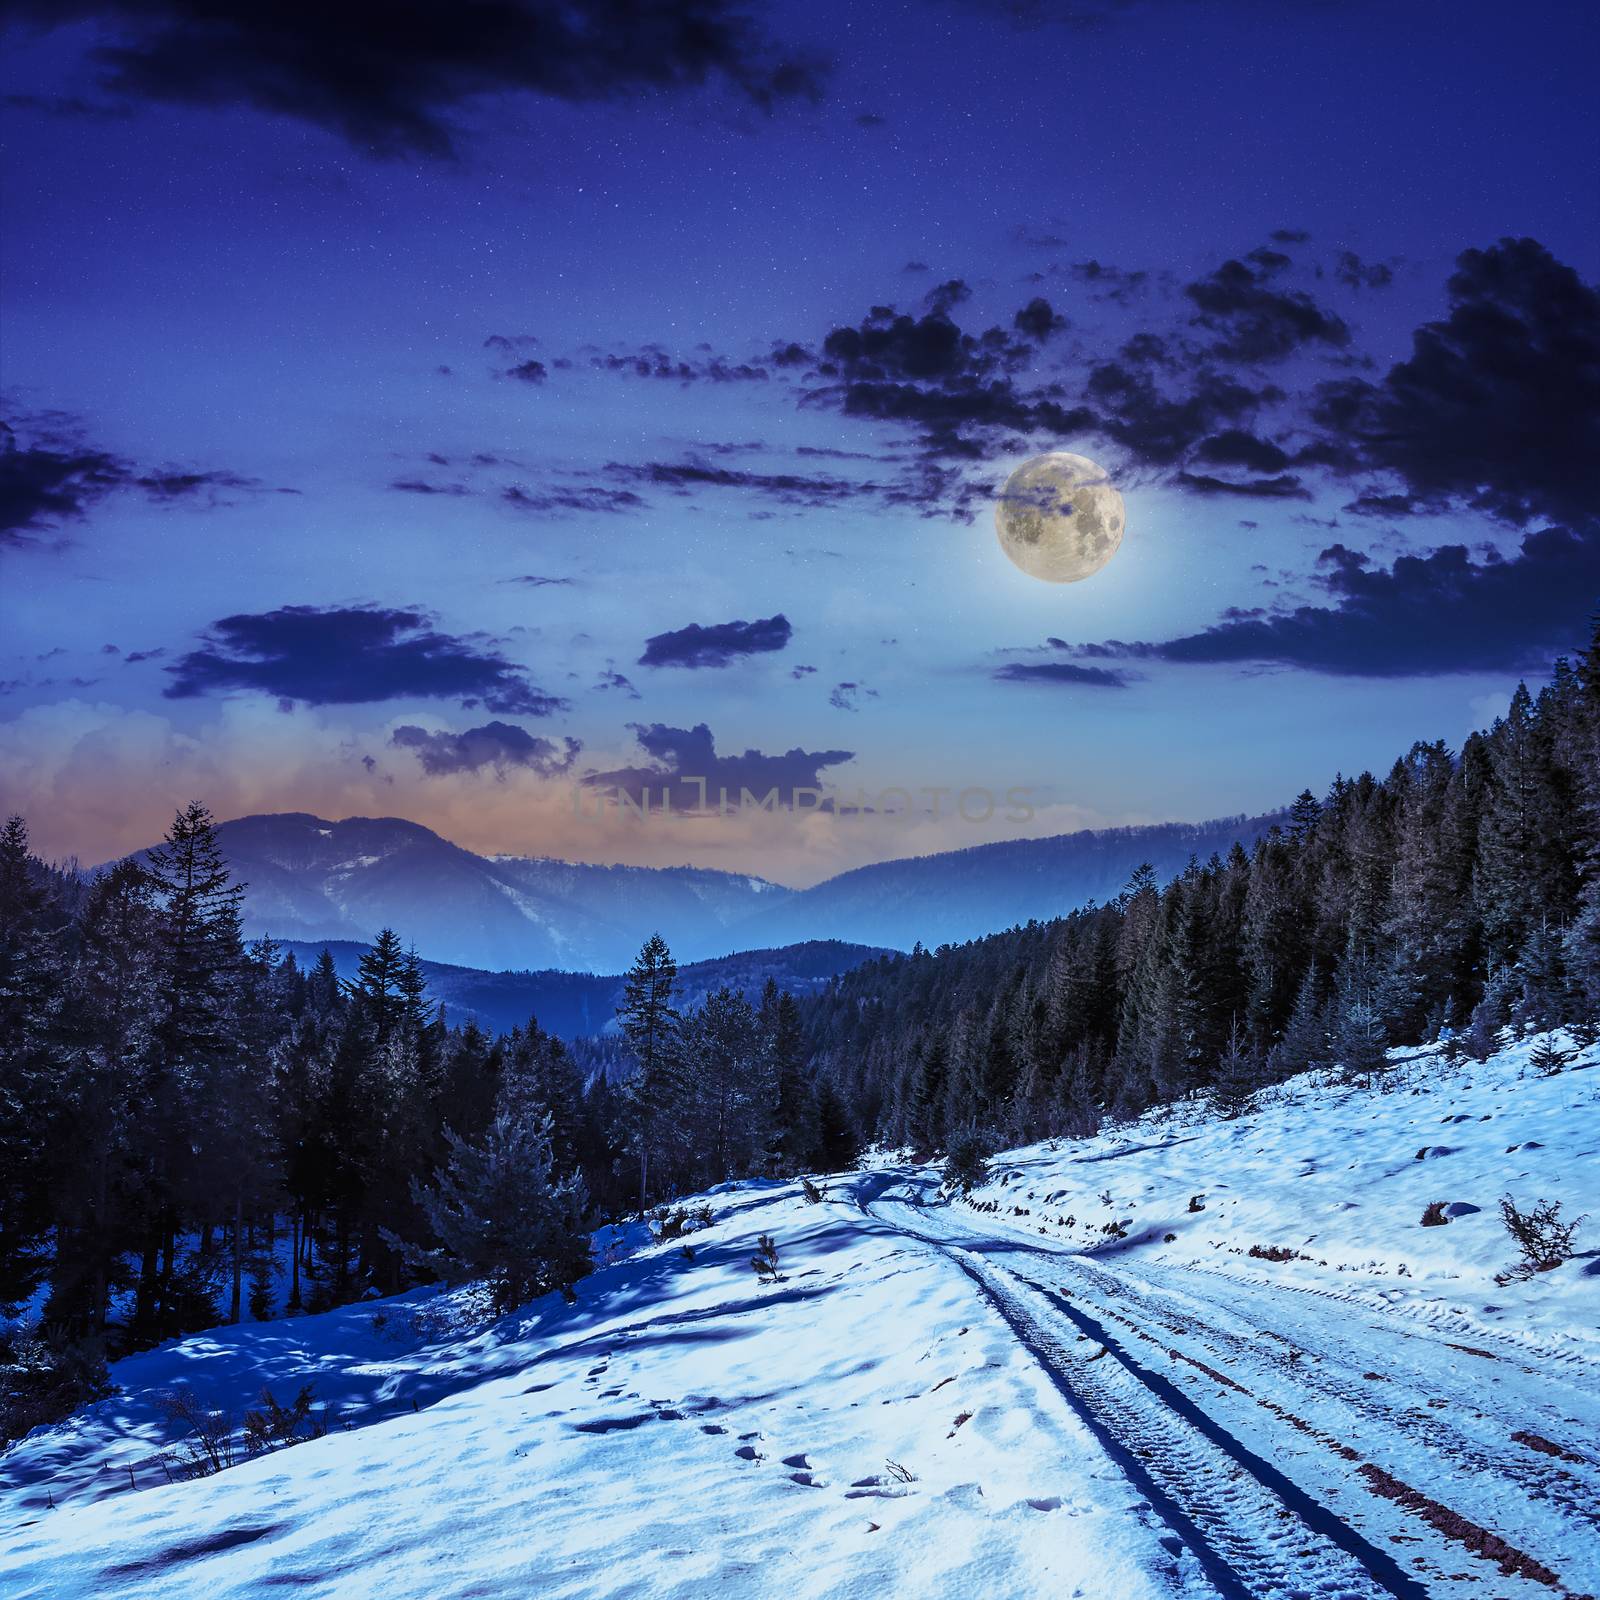 snowy road to coniferous forest in mountains at night by Pellinni